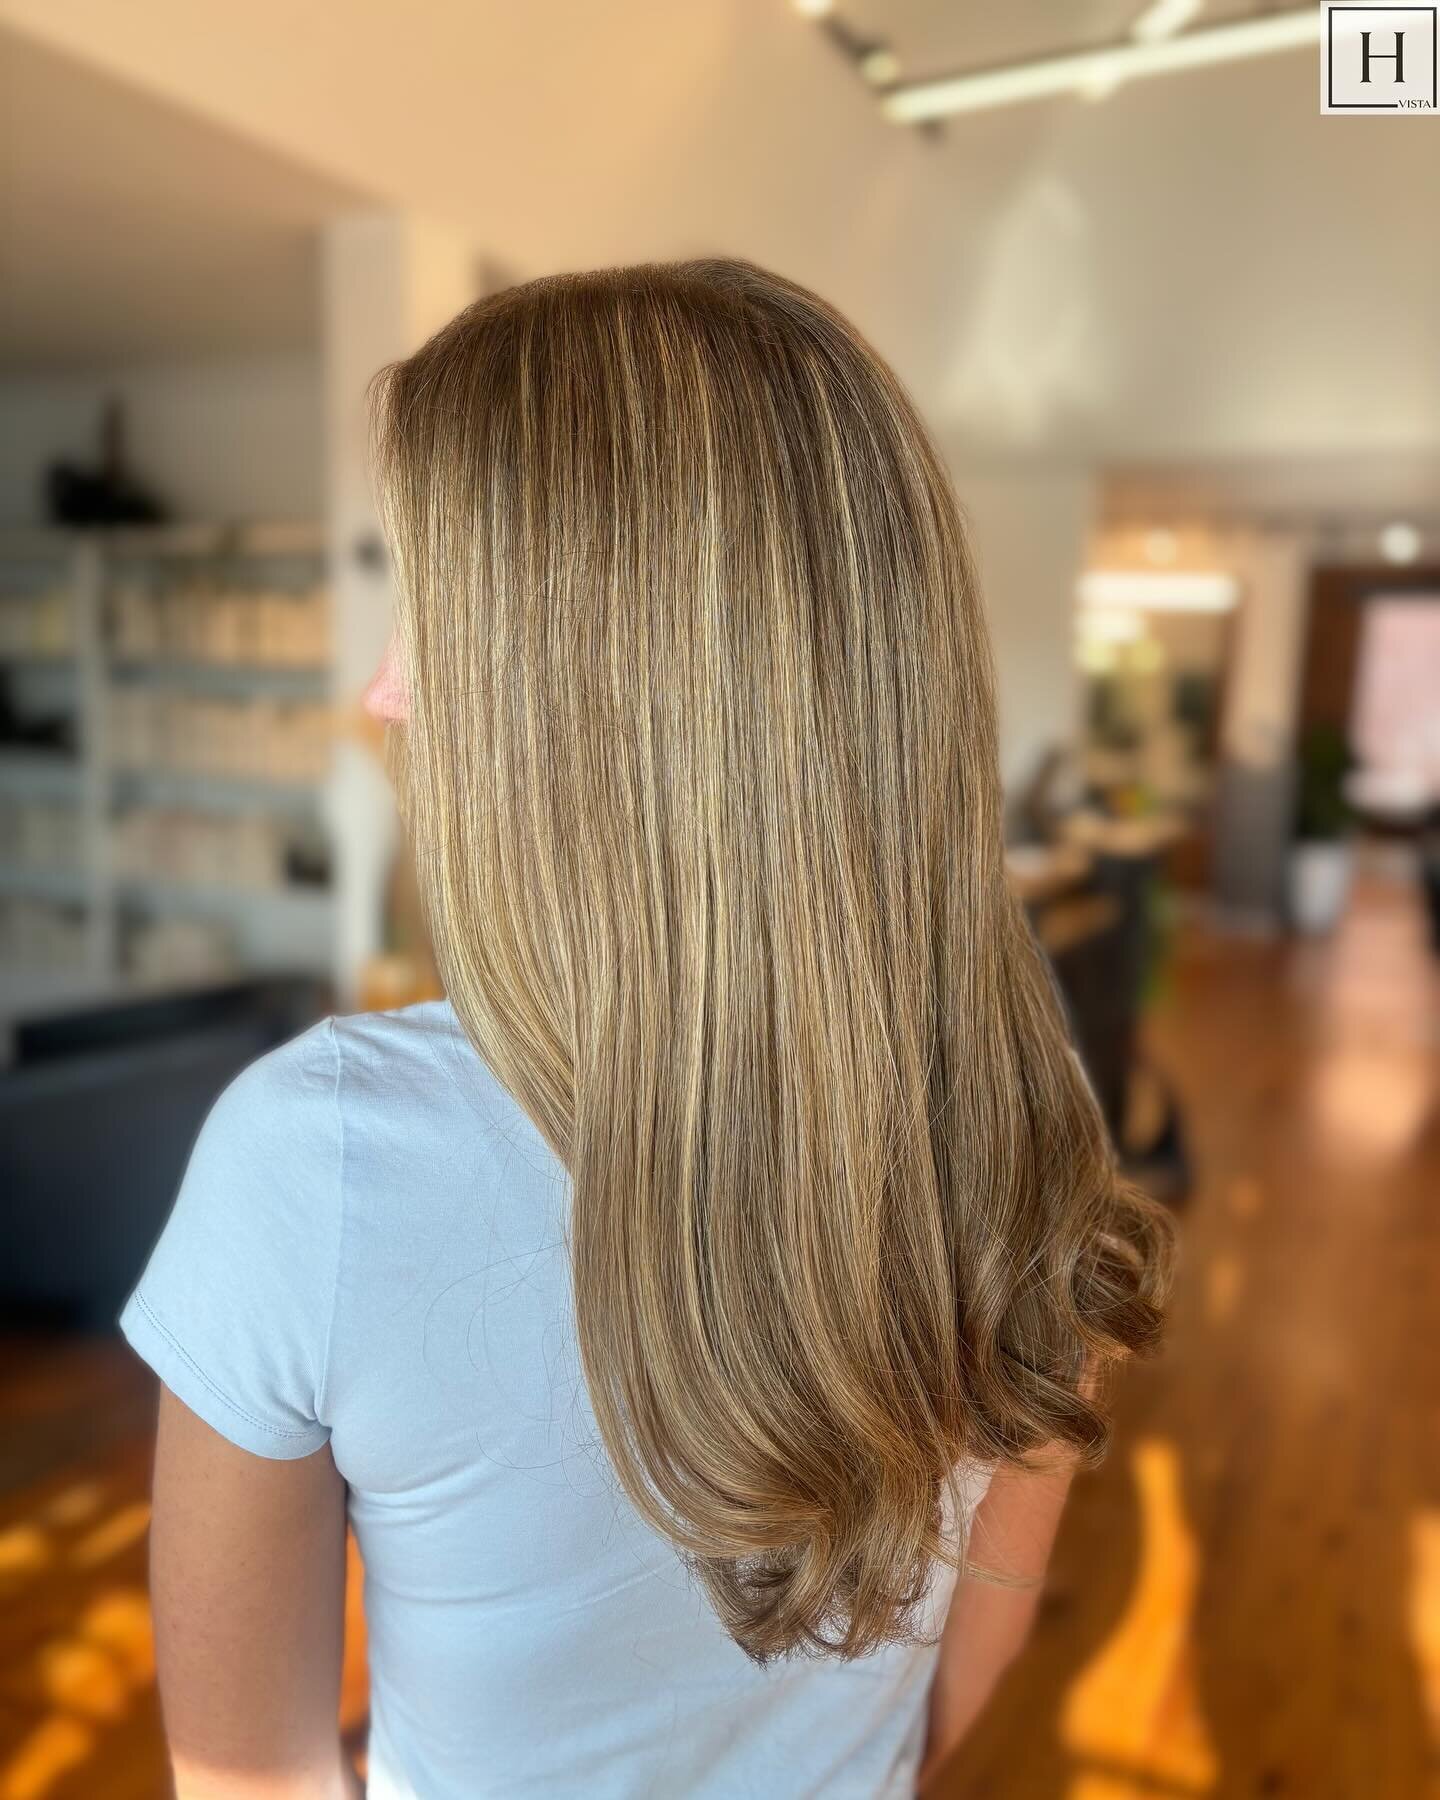 If you want hair like this, book an appointment with @maceydidmyhair now! 😍

📞803.667.9606
💻hyde.salon

#hair #salon #salons #hairsalon #hairsalons #stylist #stylists #hairstylist #hairstylists #hyde #hydesalons #hydesalon #hydevista #thevista #th